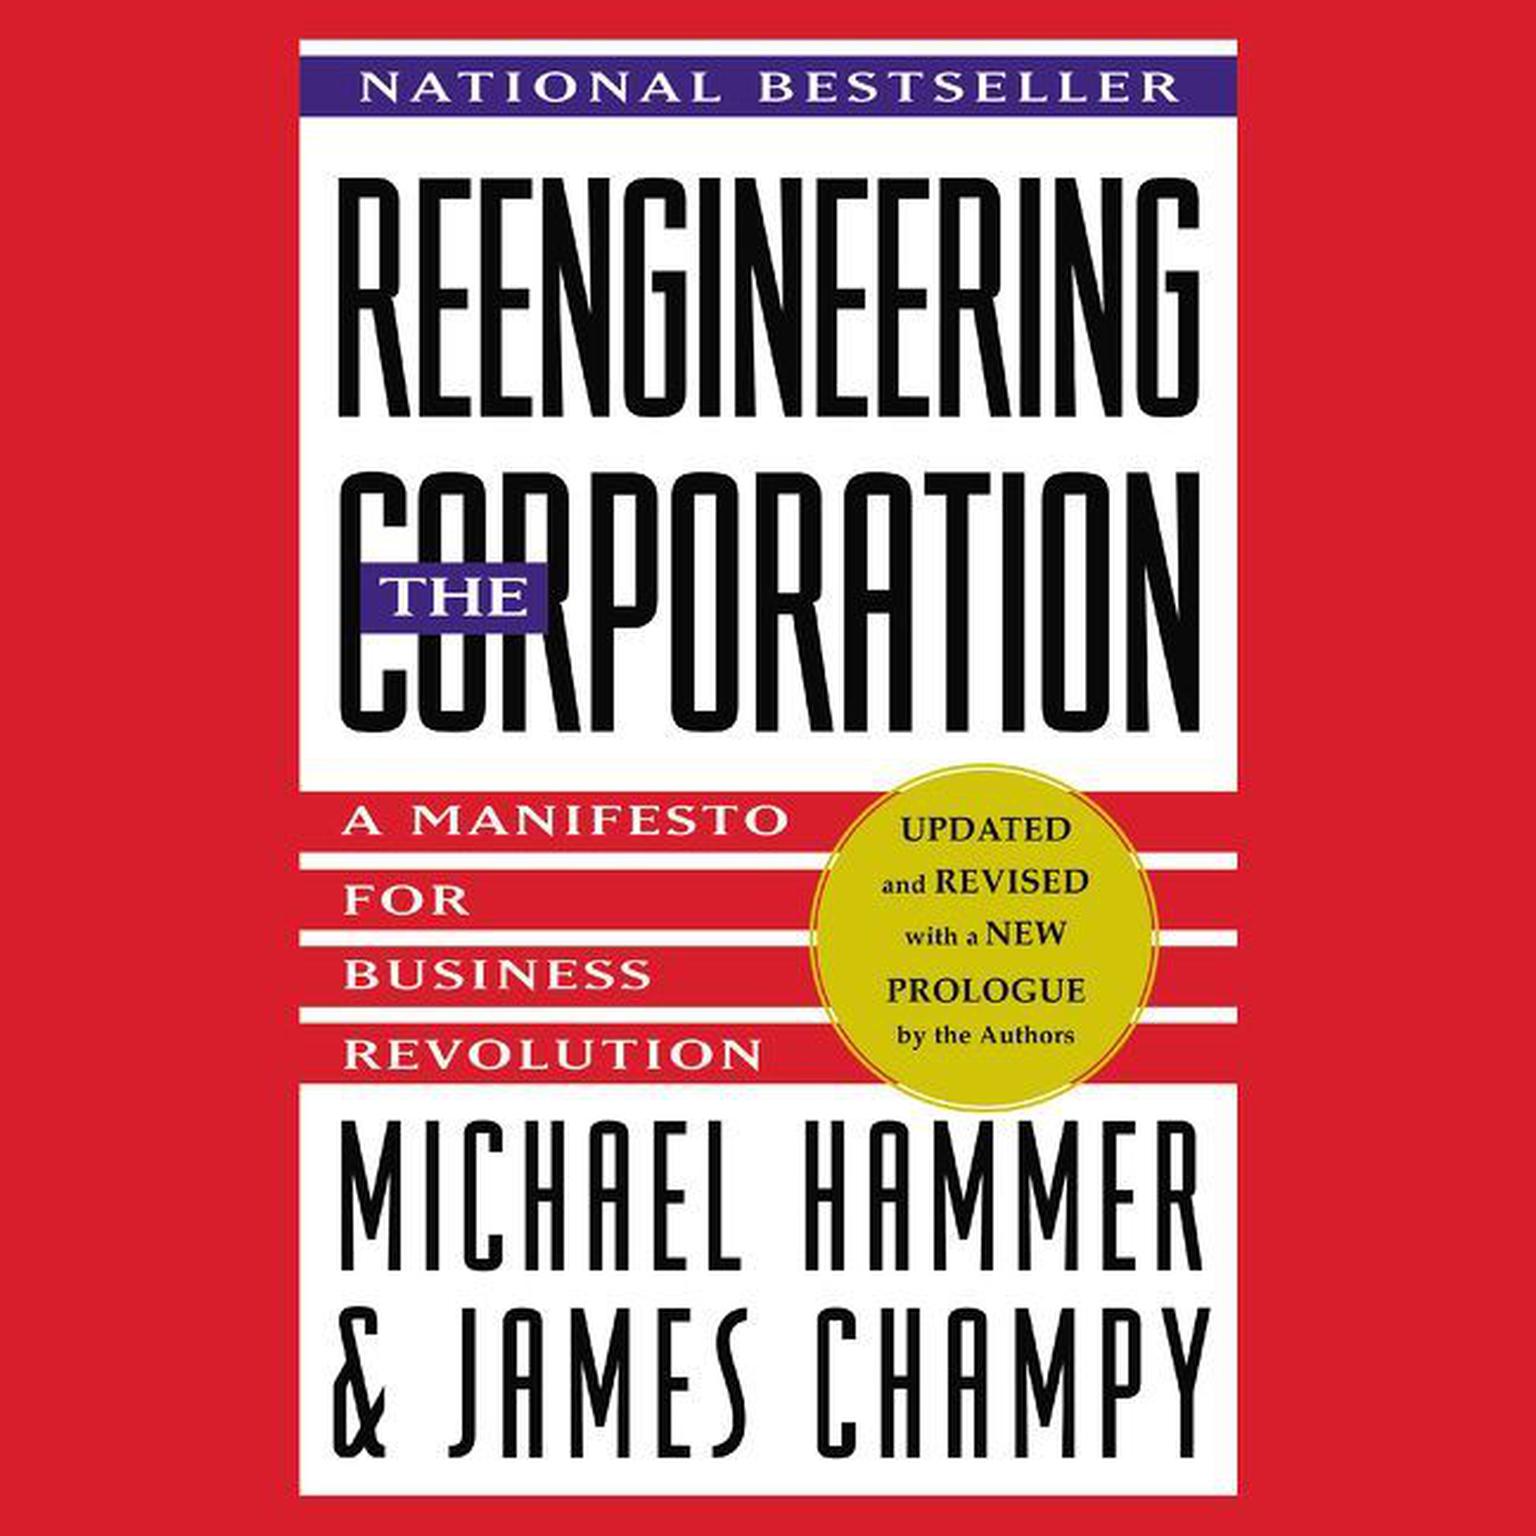 Reengineering the Corporation (Abridged): A Manifesto for Business Revolution Audiobook, by Michael Hammer